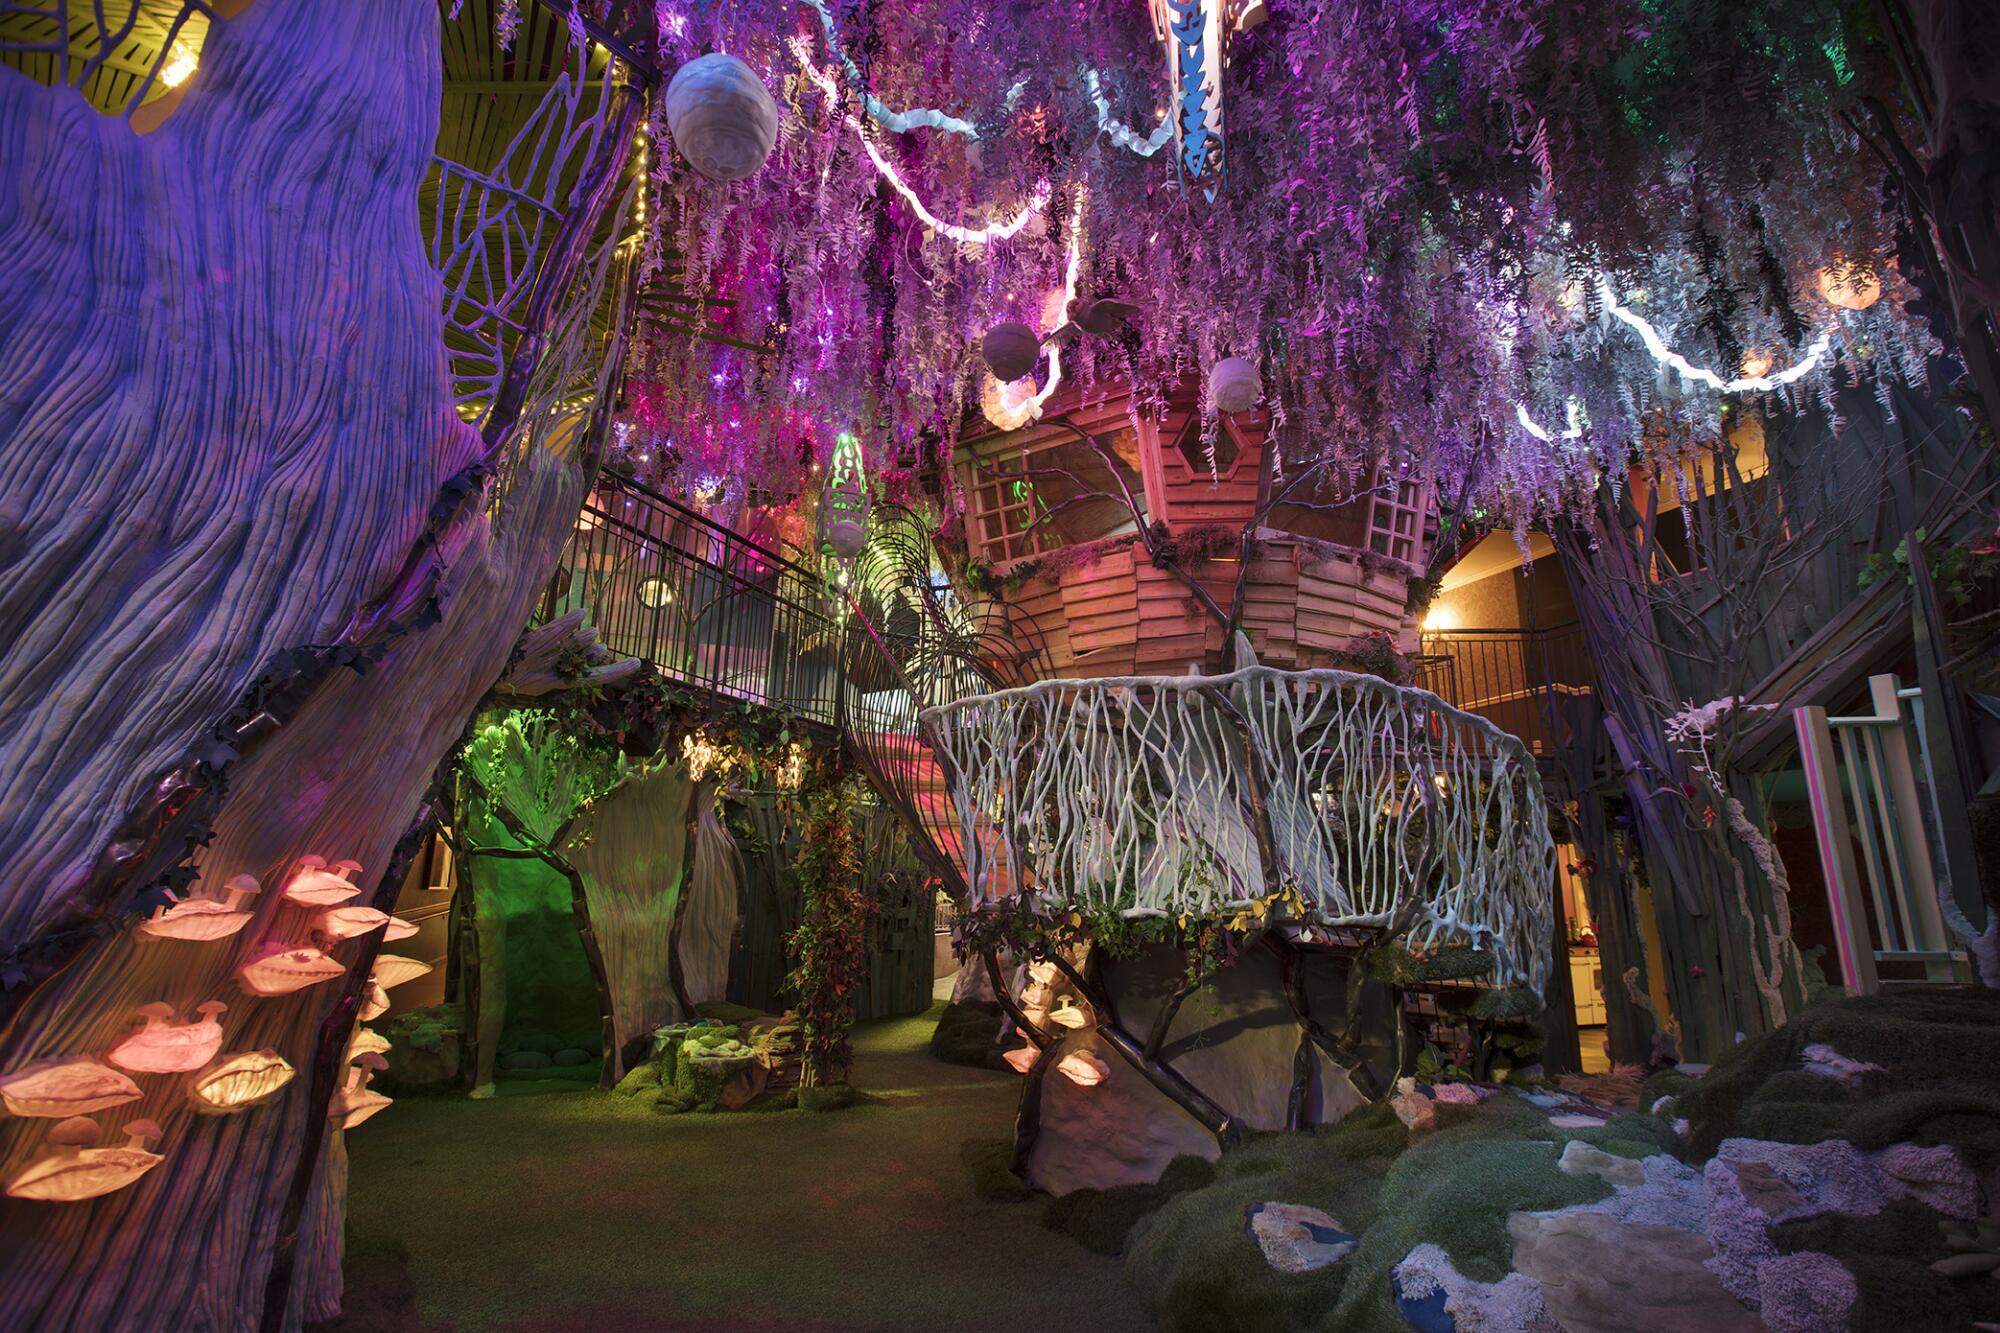 Glowing trees and hidden paths inside Meow Wolf's "House of Eternal Return."